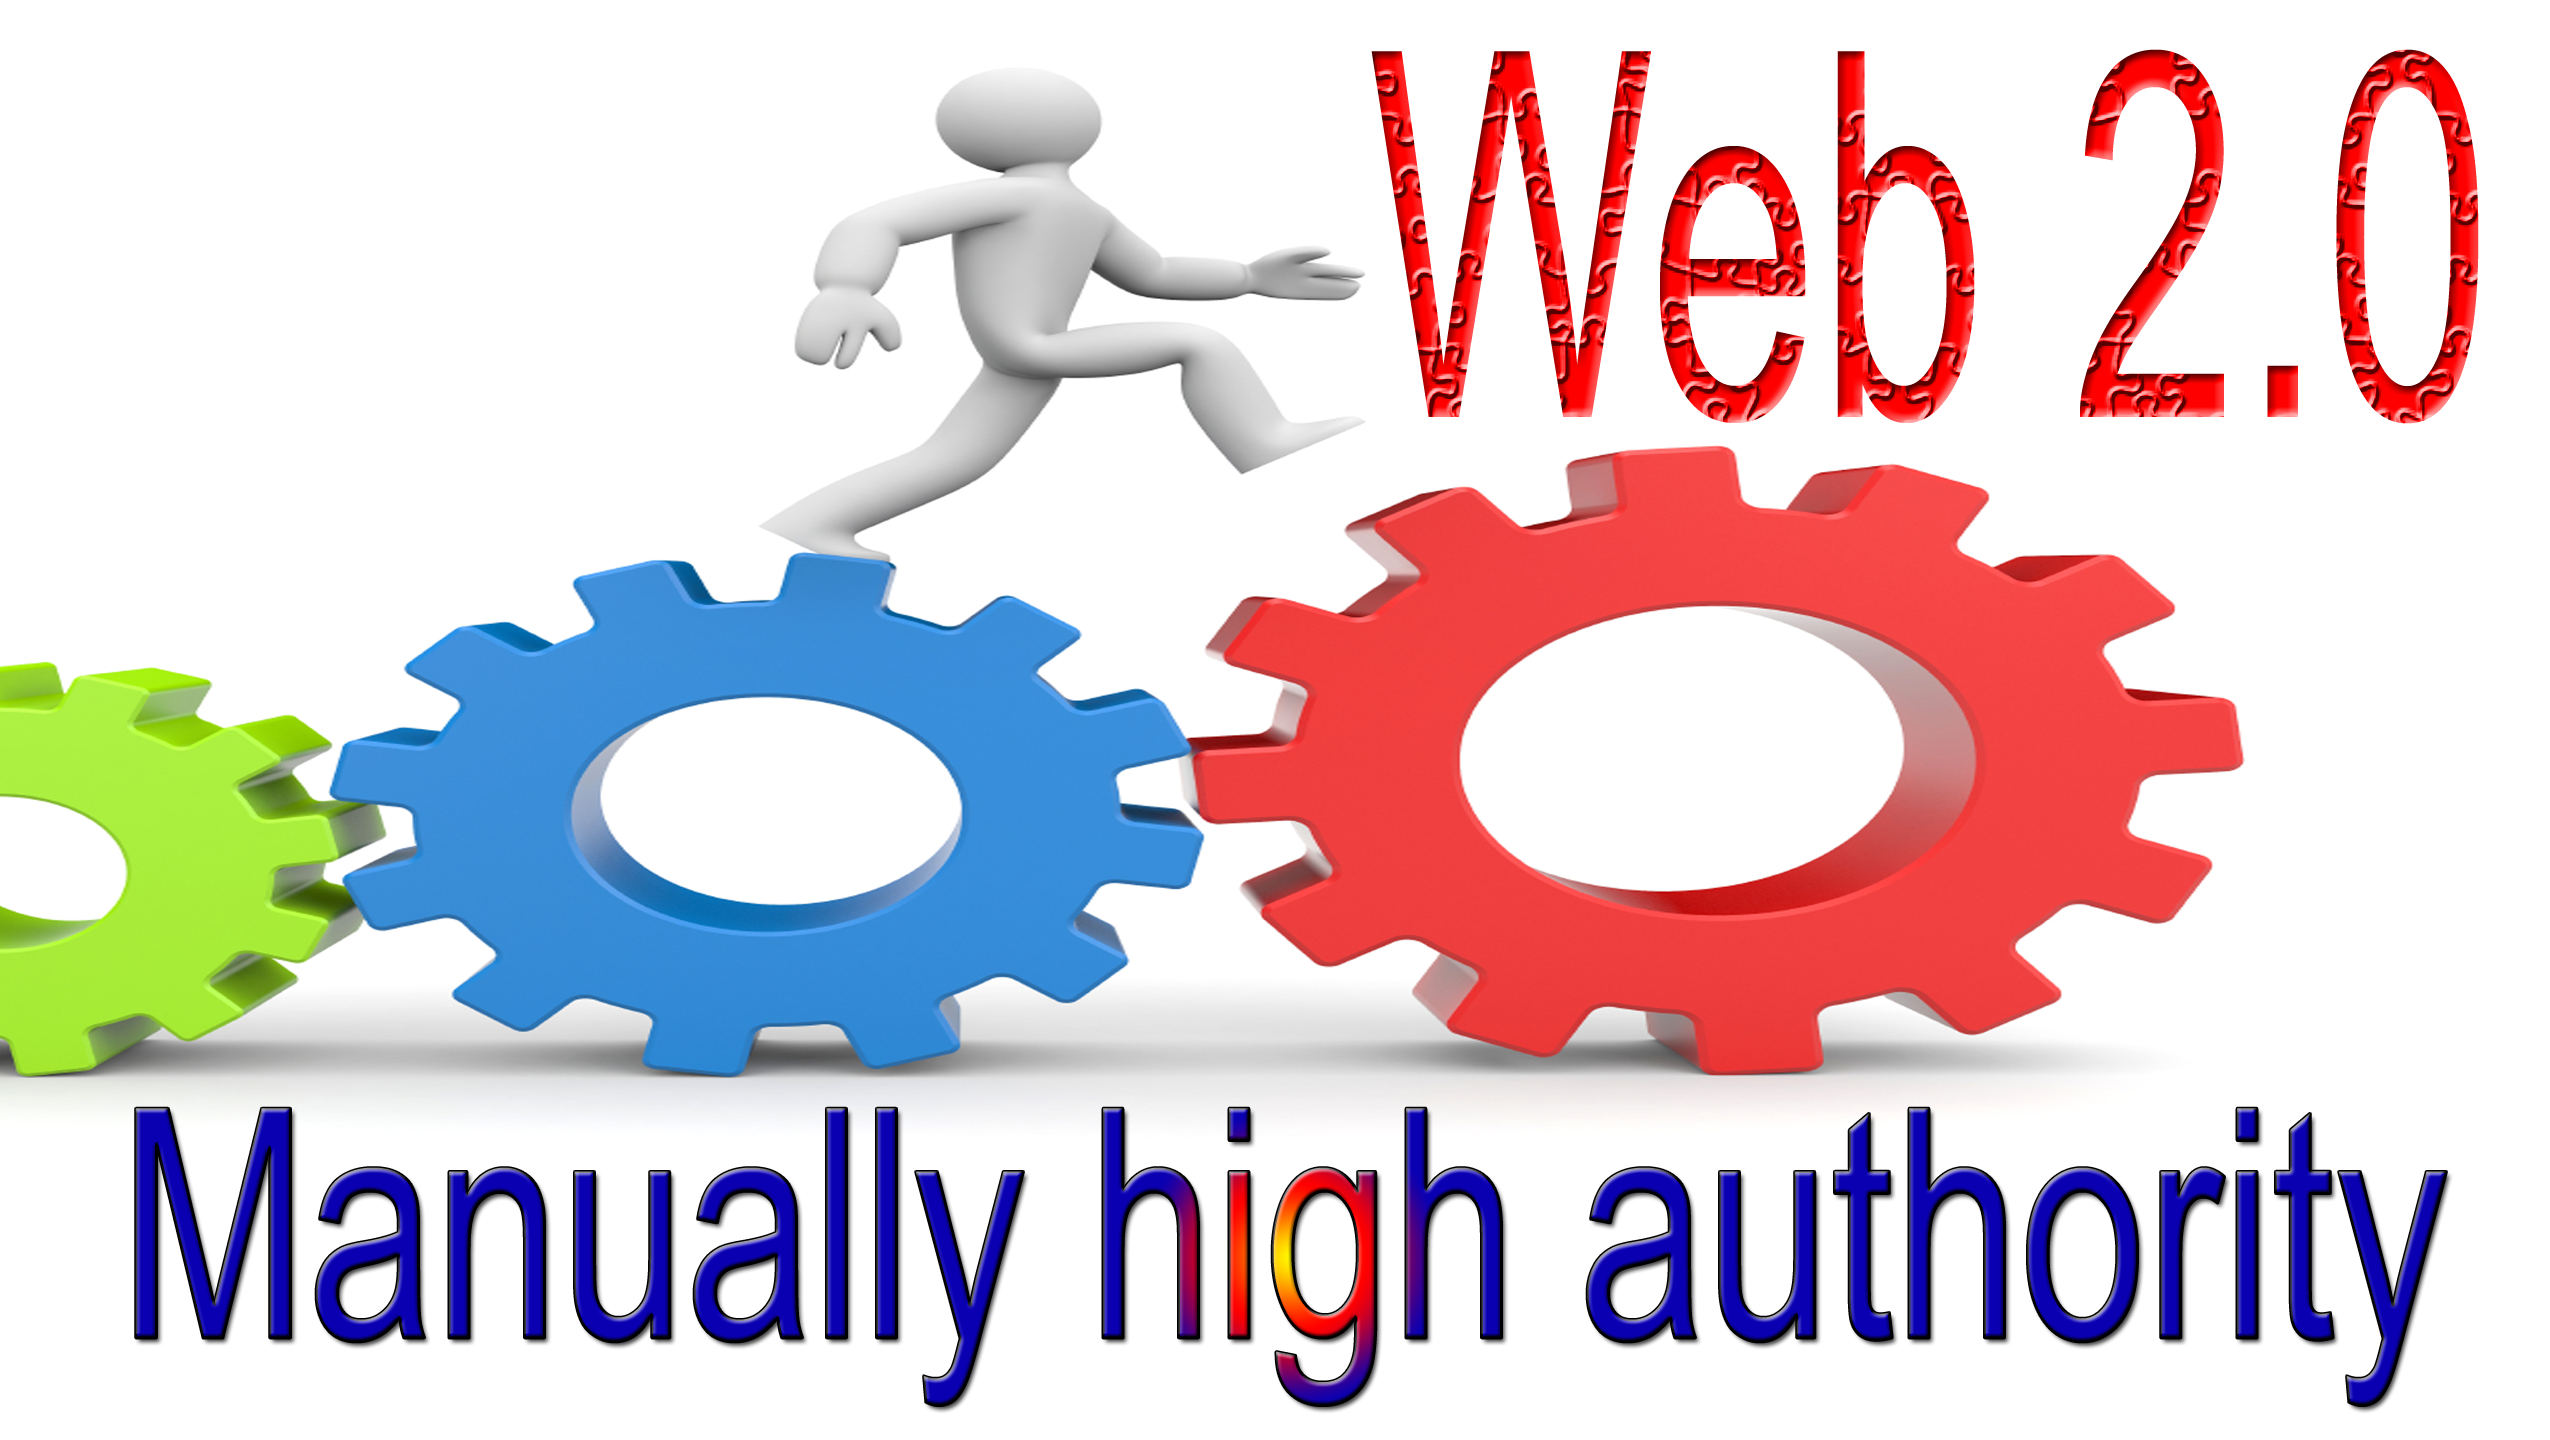 Get rank with 30 manually high authority web 2.0 backlinks